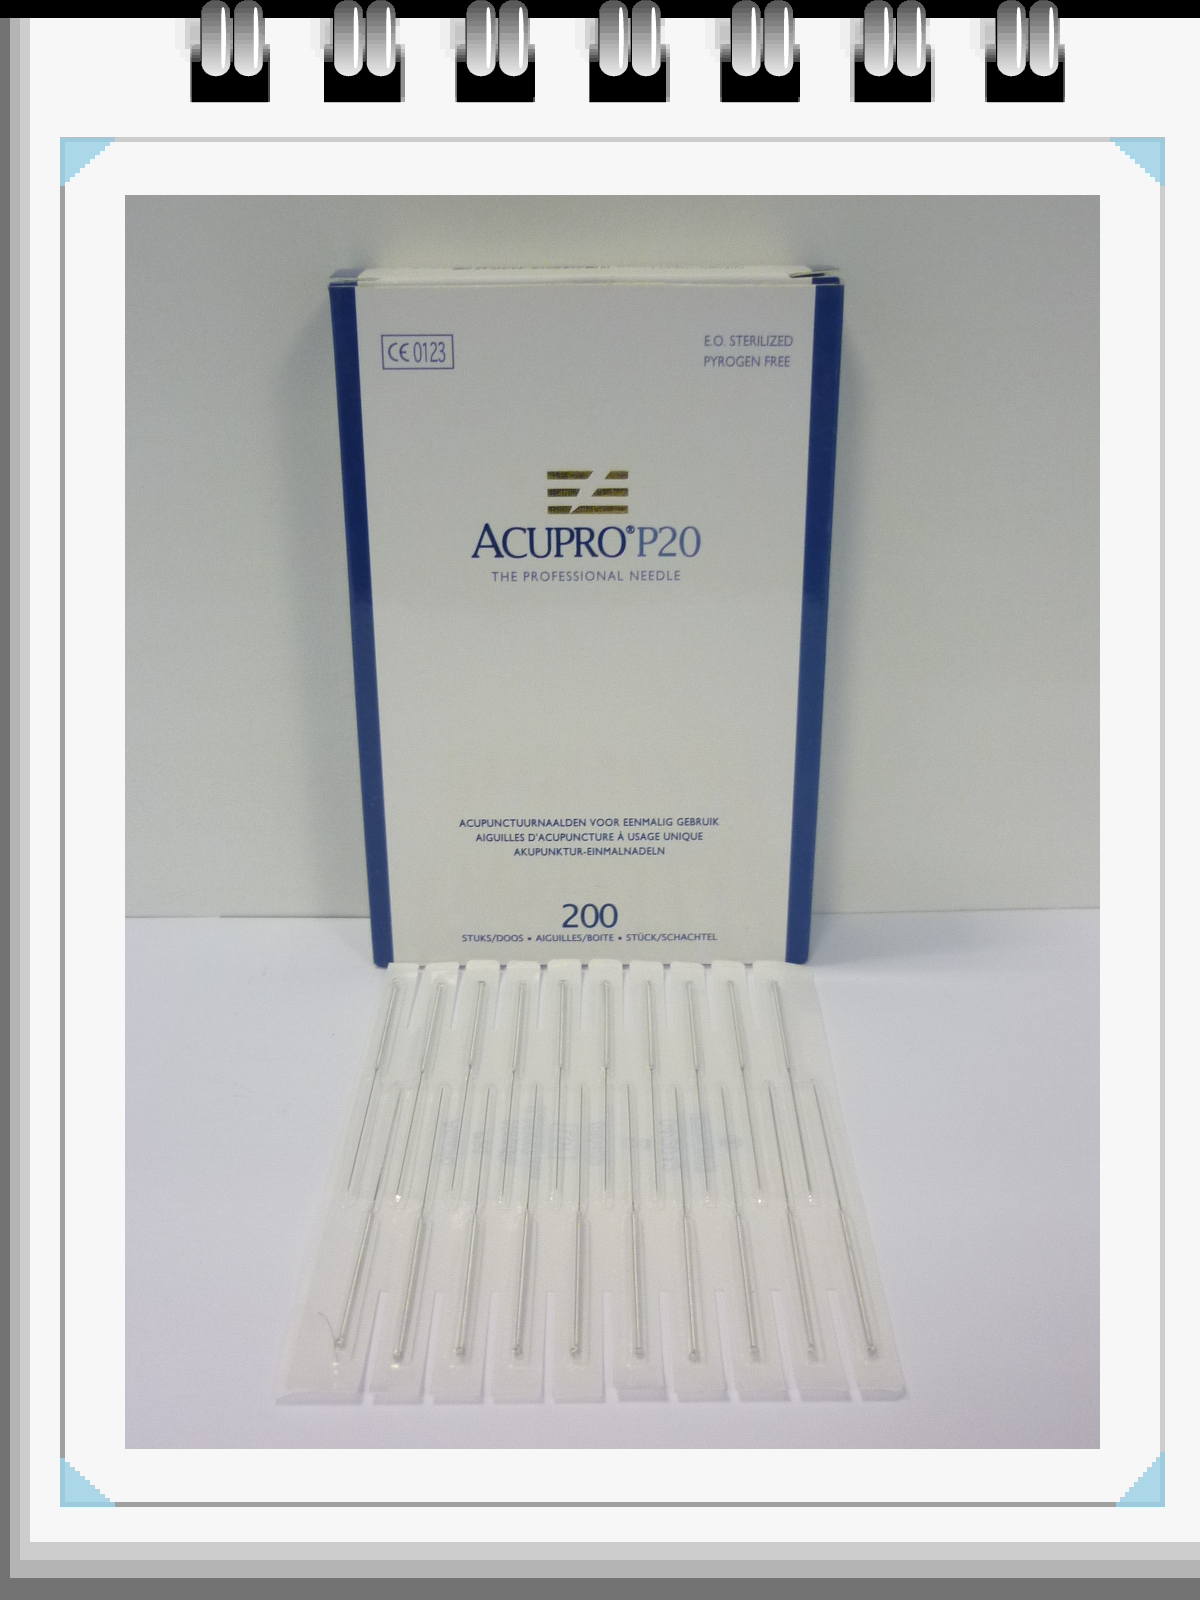 All Products - Acupuncture naalden 0,30 x 40mm - p--200 stuks